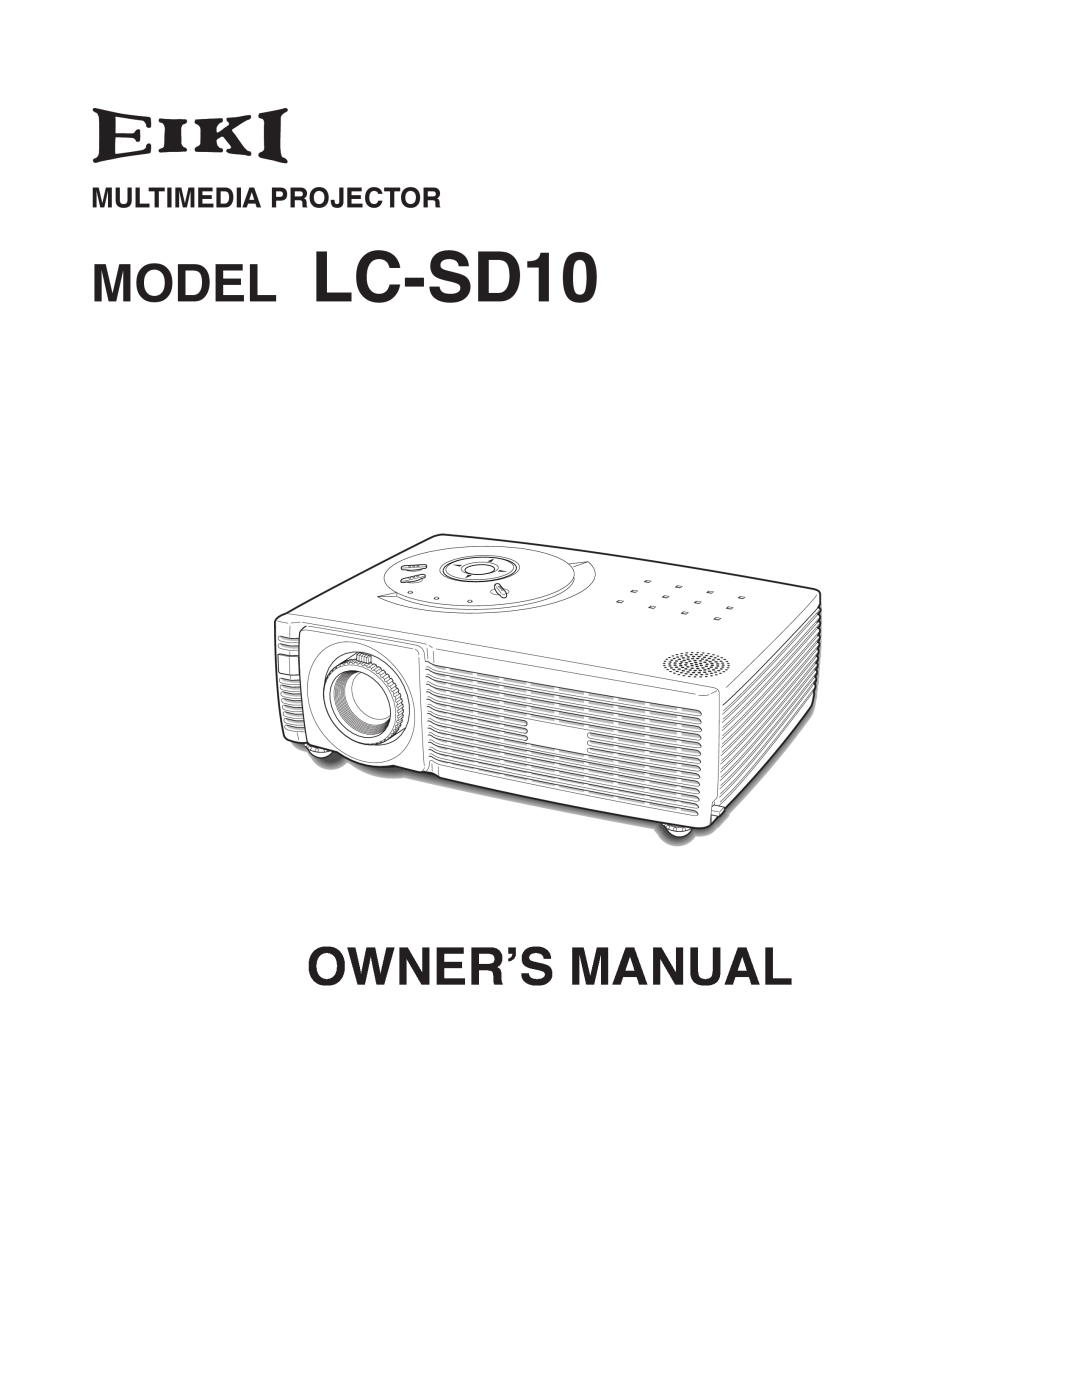 Eiki owner manual MODEL LC-SD10, Owner’S Manual, Multimedia Projector 